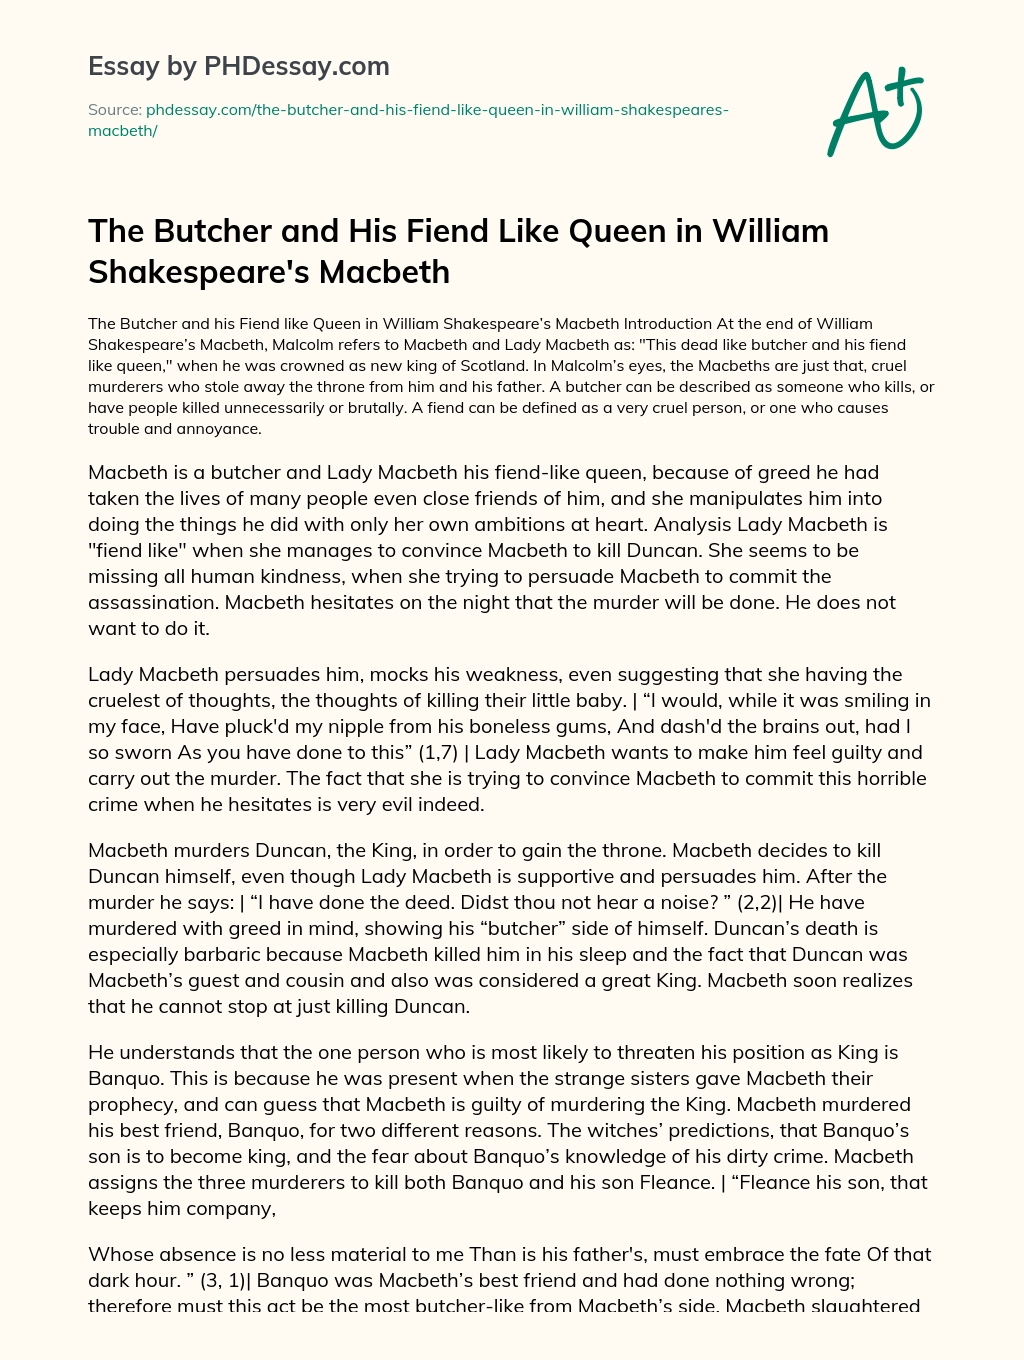 The Butcher and His Fiend Like Queen in William Shakespeare’s Macbeth essay